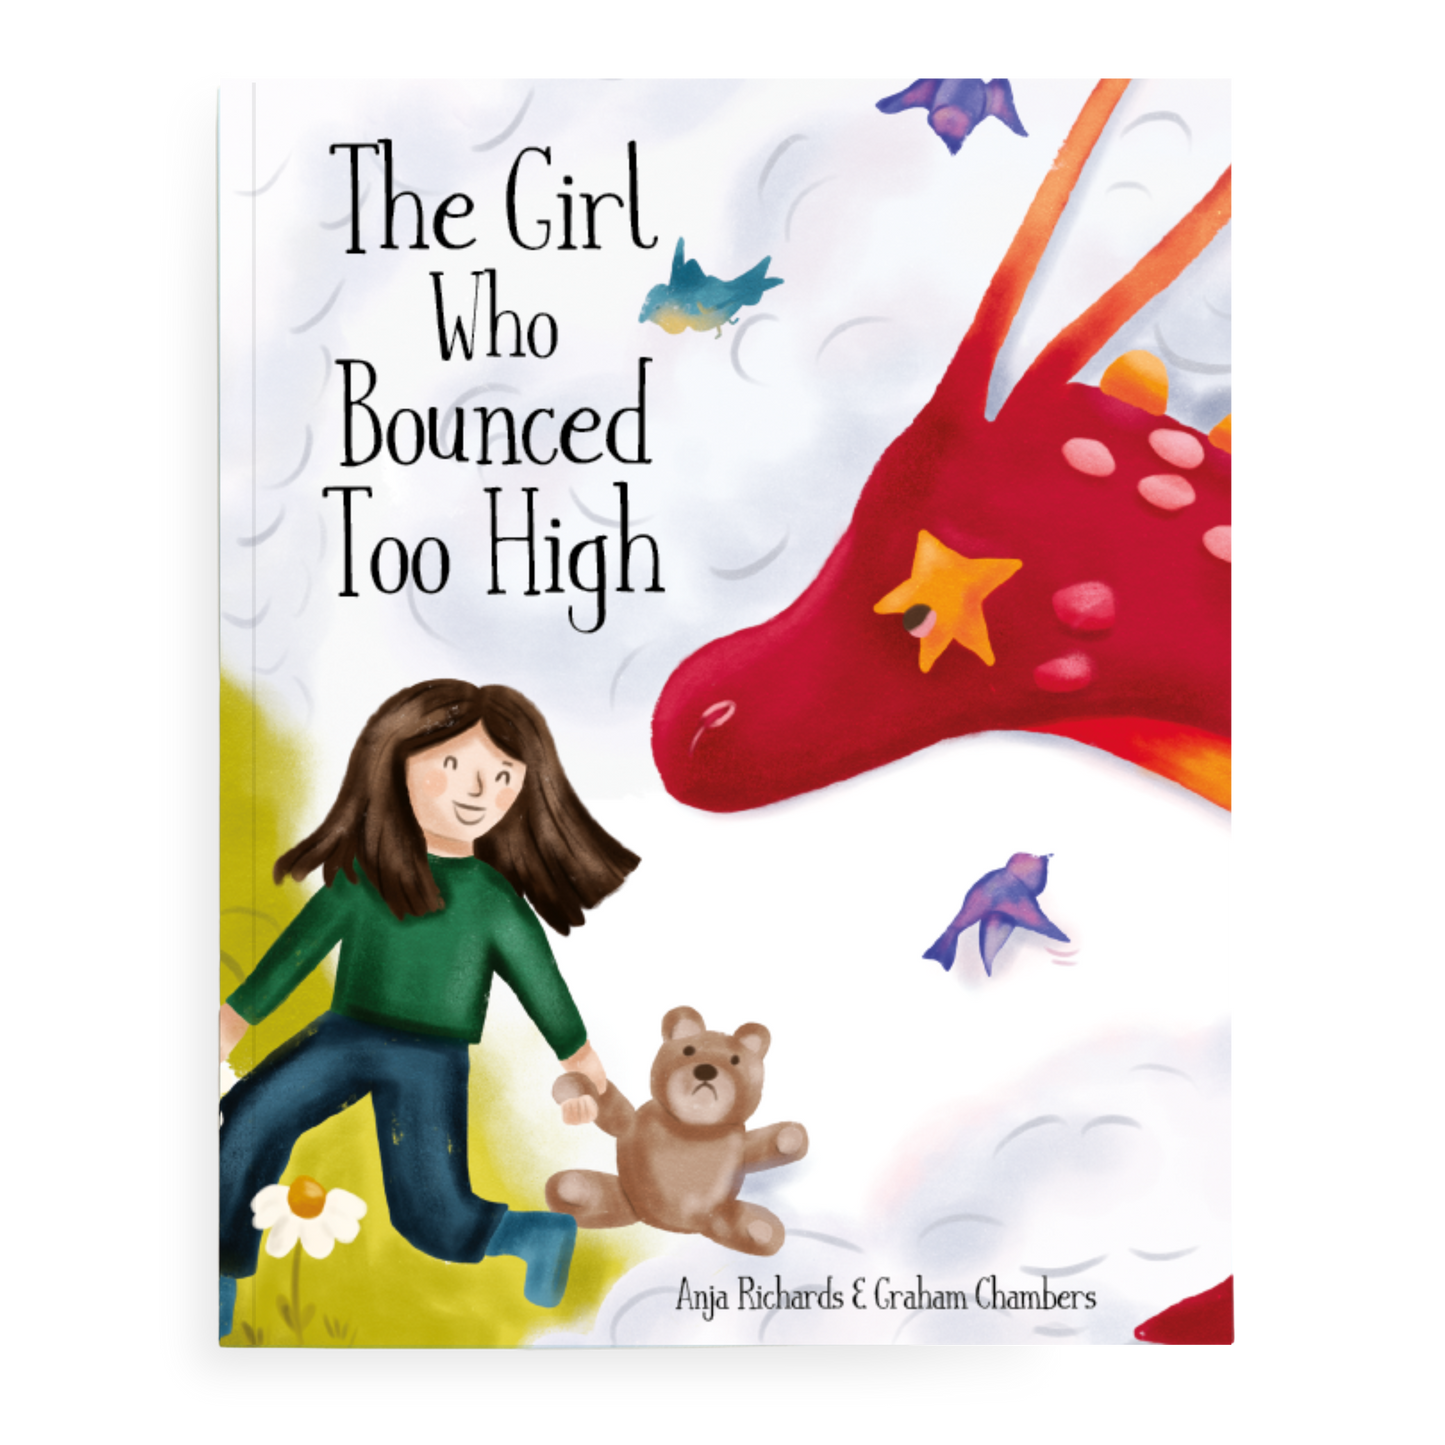 Pre-order The Girl Who Bounced Too High